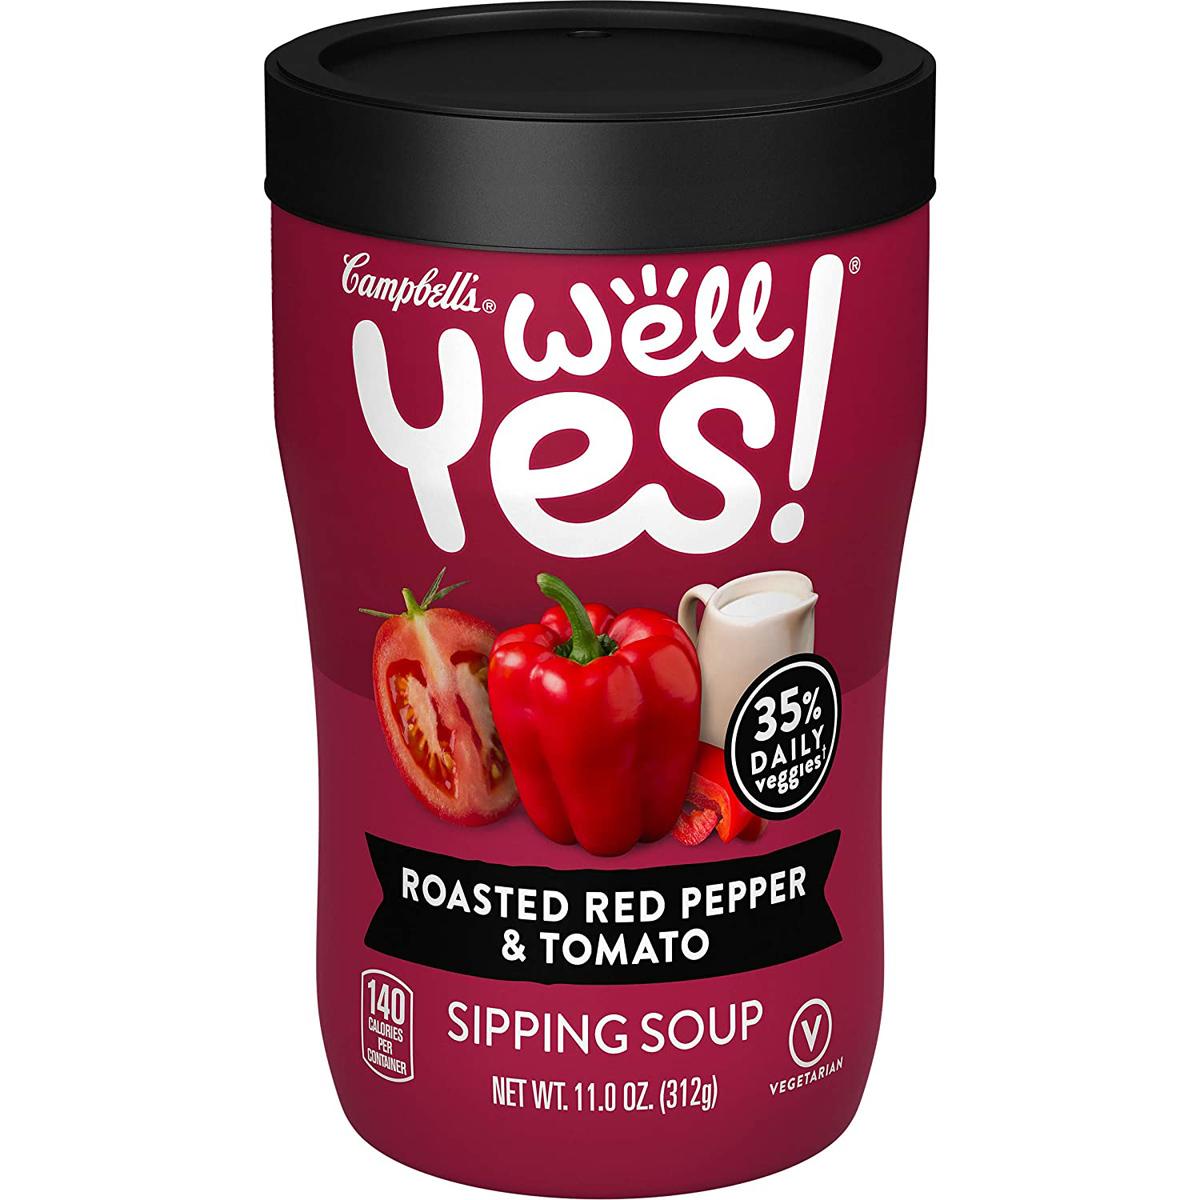 8 Campbells Well Yes Roasted Red Pepper Sipping Soup for $9.99 Shipped